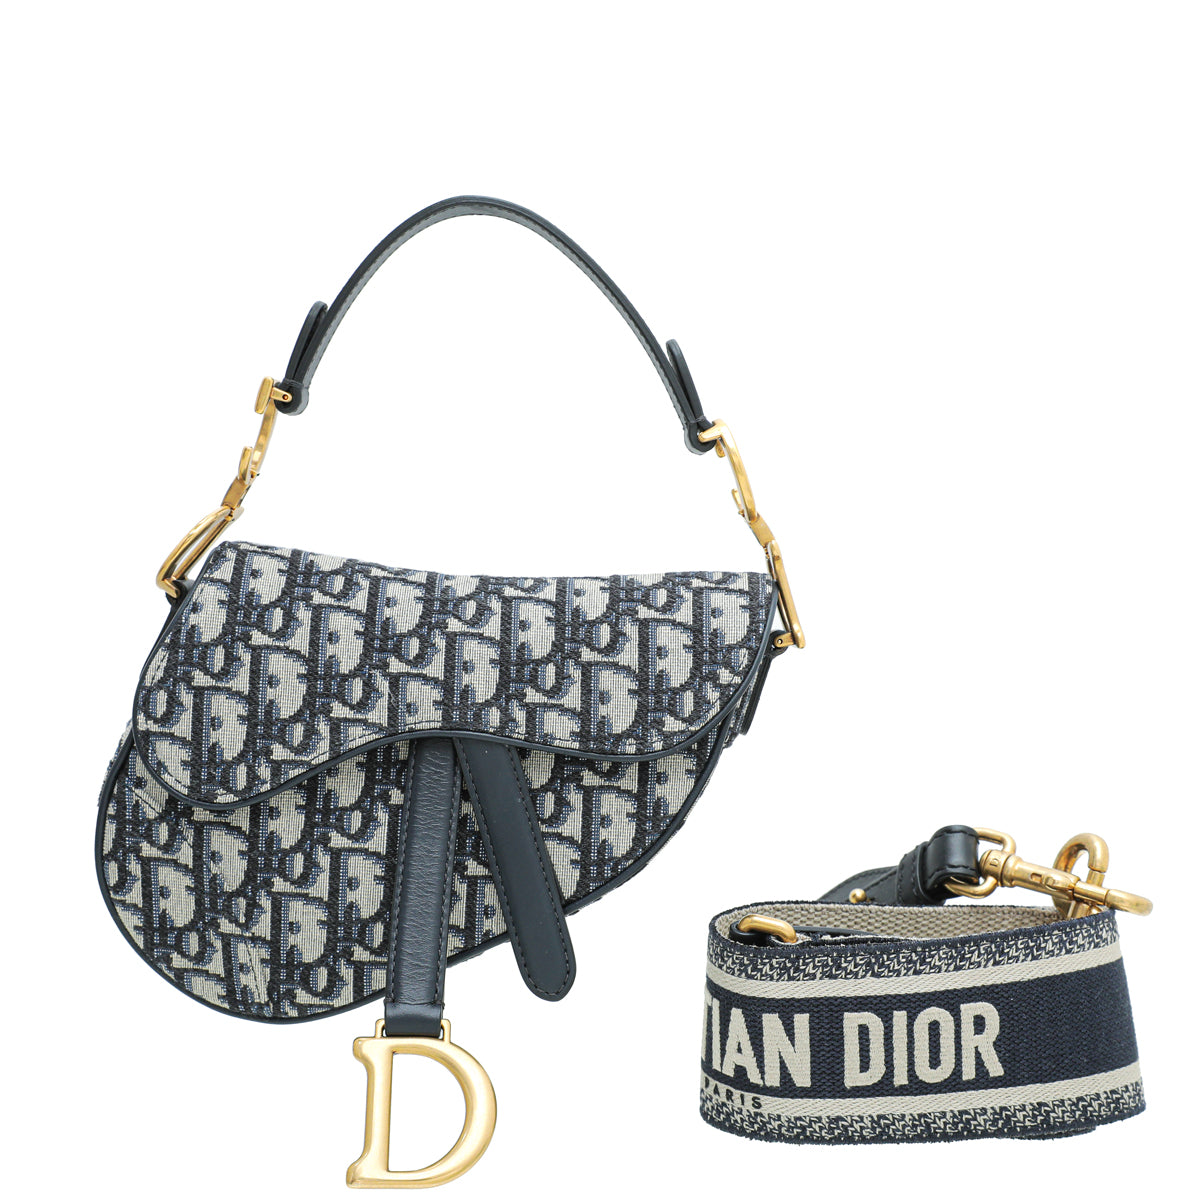 Dior Saddle Bag Medium with a strap  Dior saddle bag Walking outfits  Street style bags